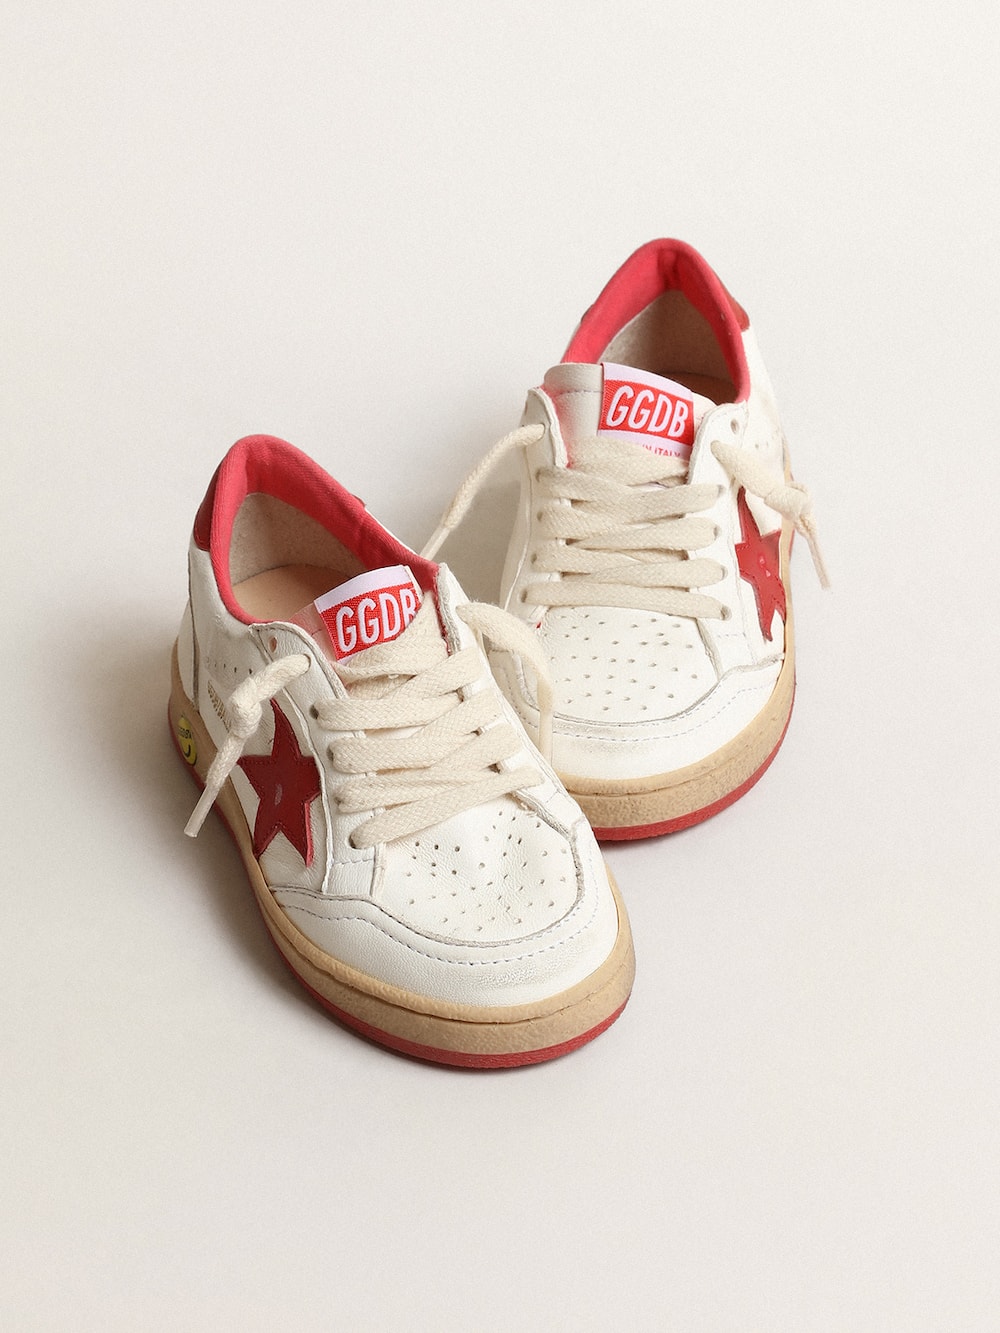 Golden Goose - Ball Star Young in nappa with red leather star and heel tab in 